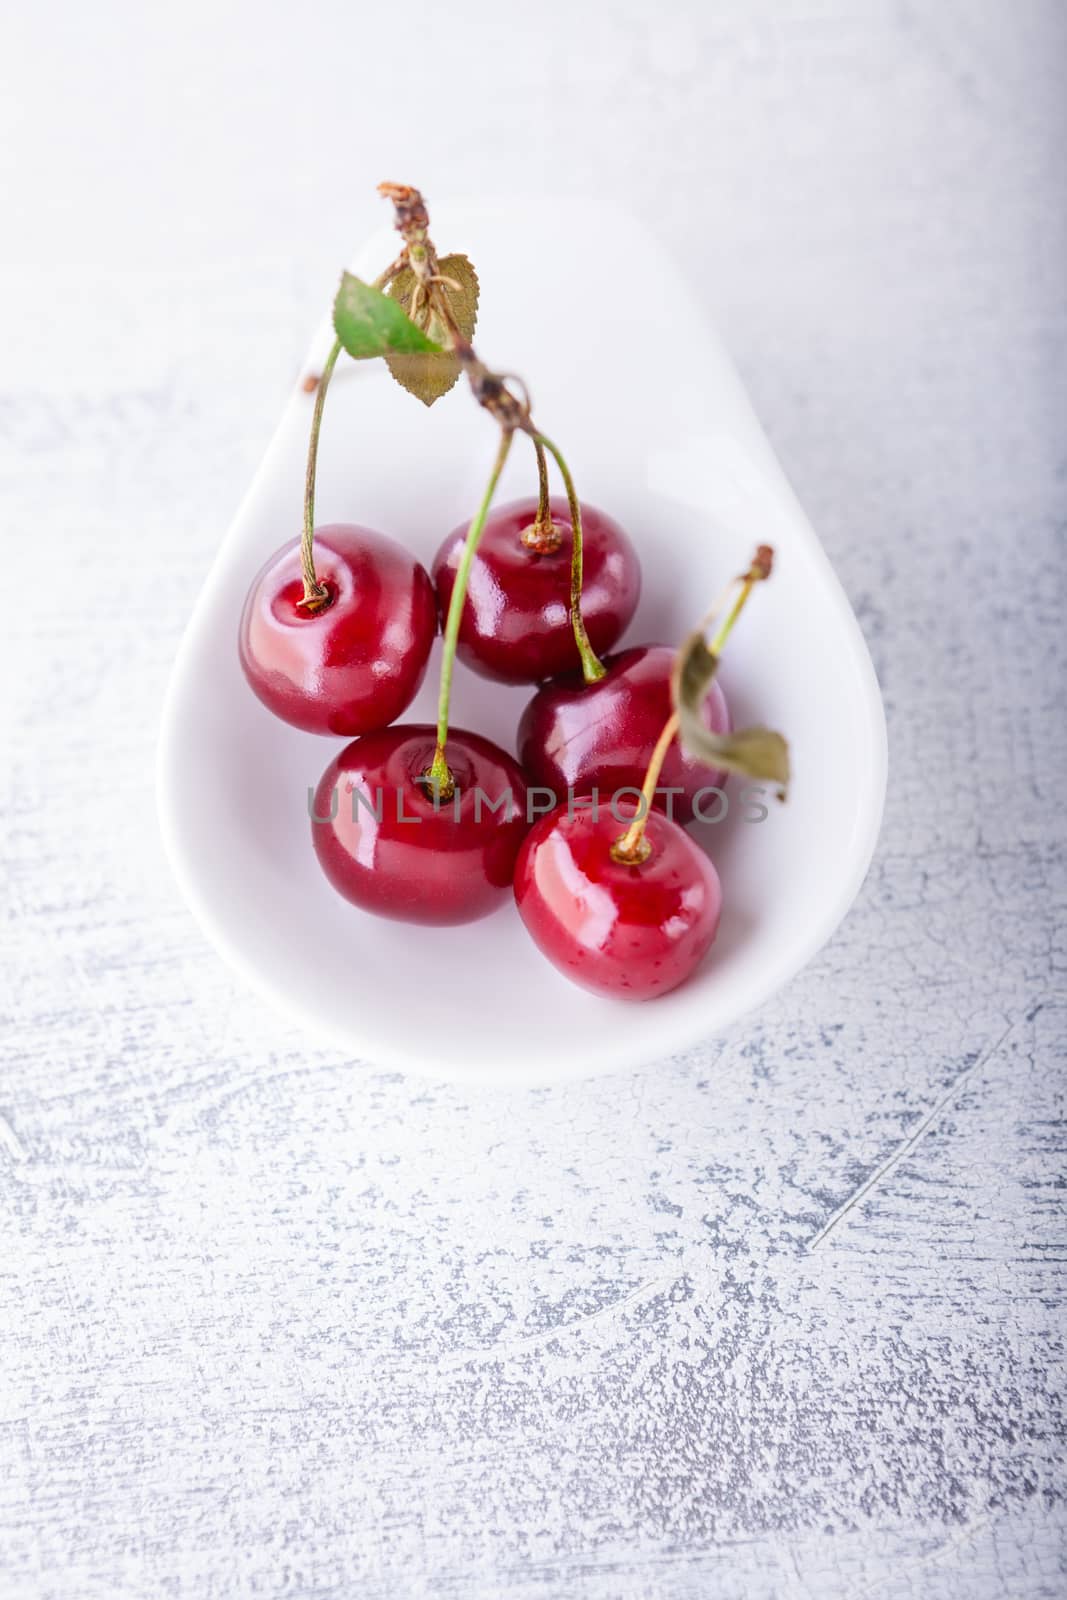 Cherries in a white dish on a wooden table 